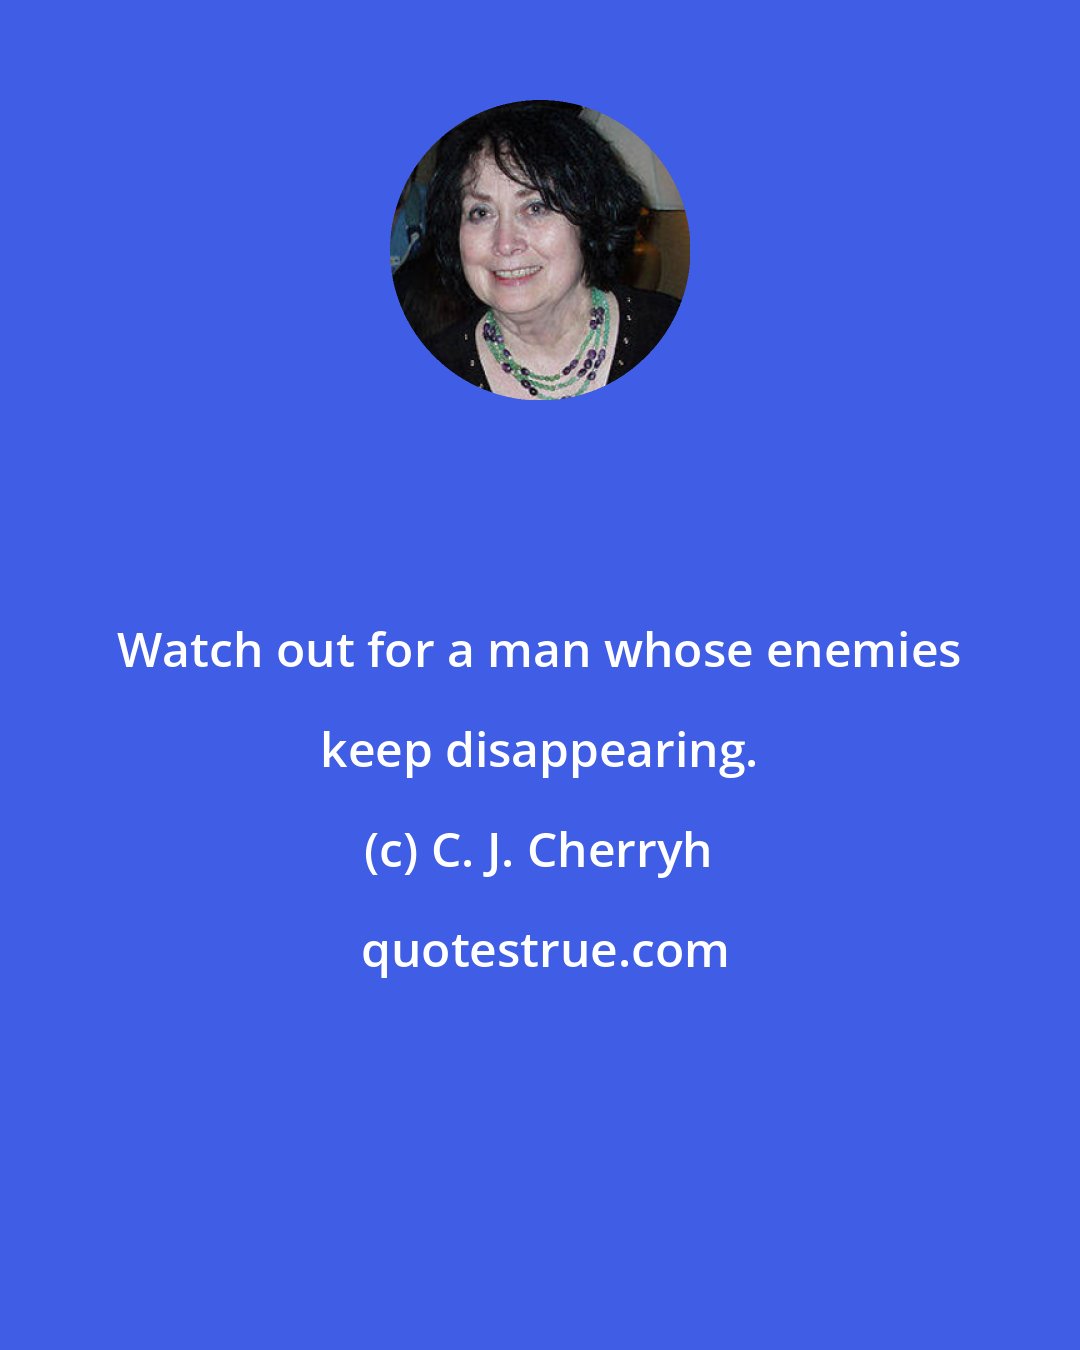 C. J. Cherryh: Watch out for a man whose enemies keep disappearing.